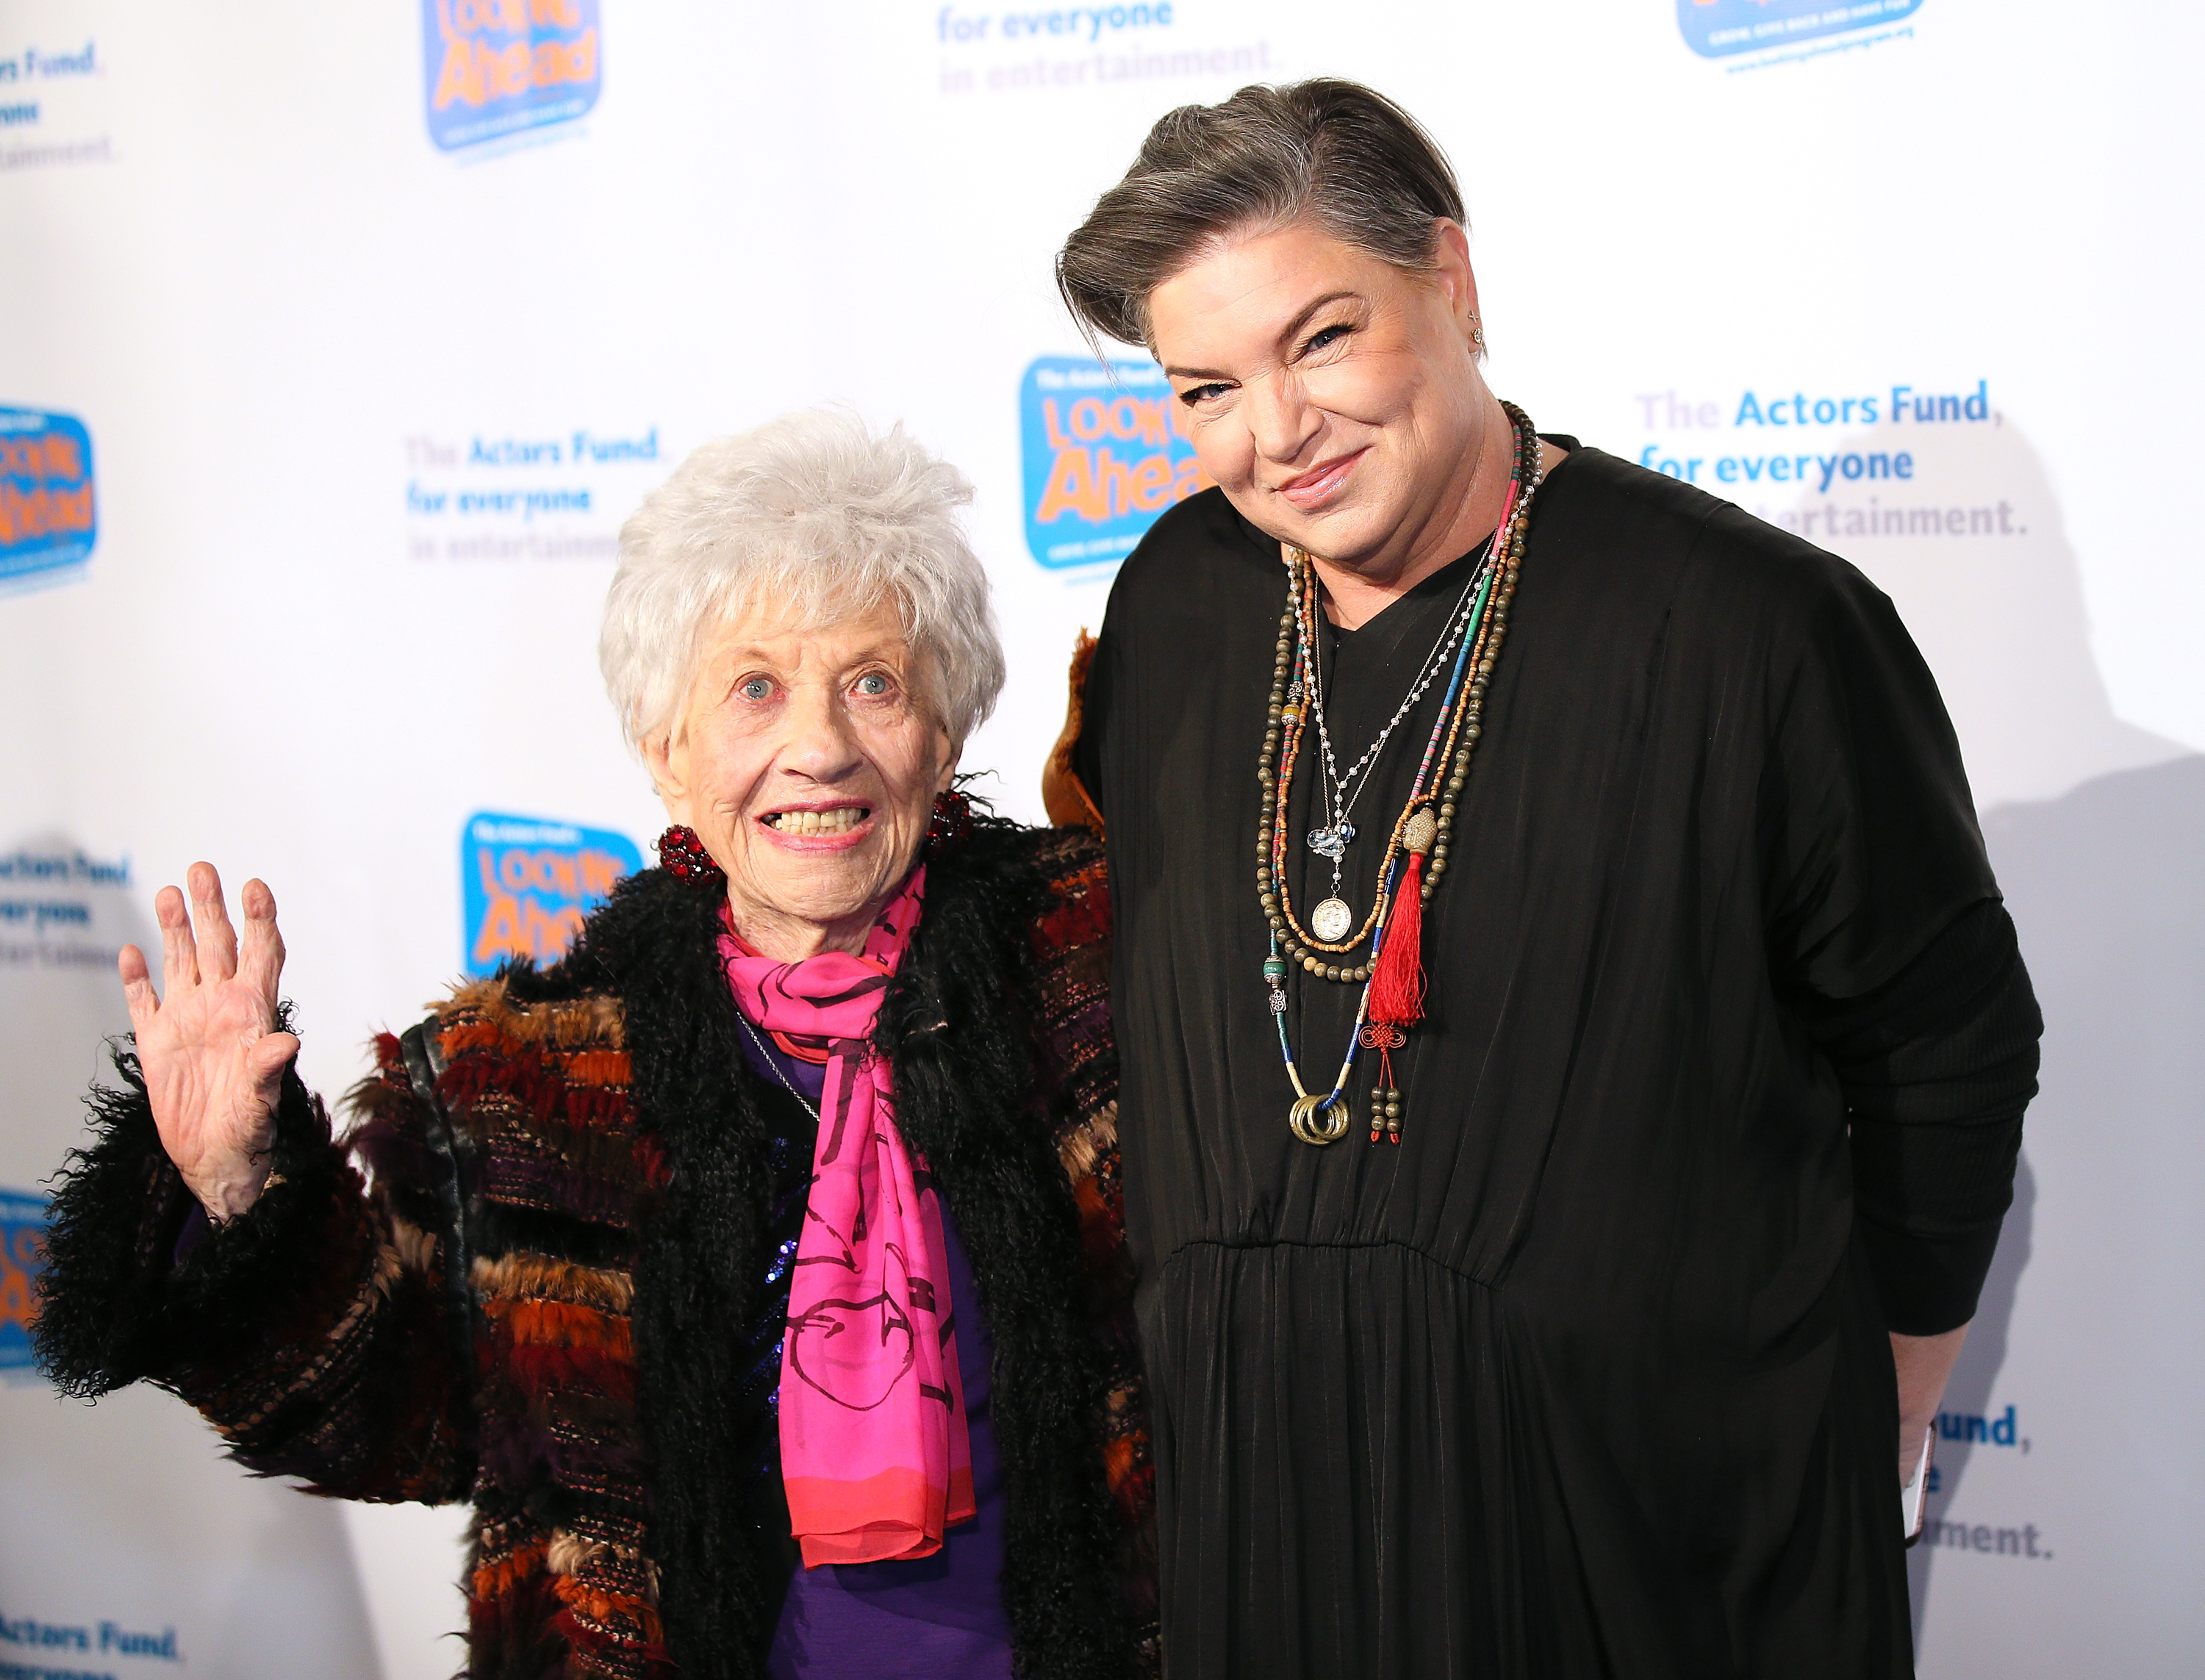 Charlotte Rae (L) and Mindy Cohn attend The Actors Fund's 2017 Looking Ahead Awards honoring the youth cast of NBC's "This Is Us" at Taglyan Complex on December 5, 2017 in Los Angeles, California. | Source: Getty Images